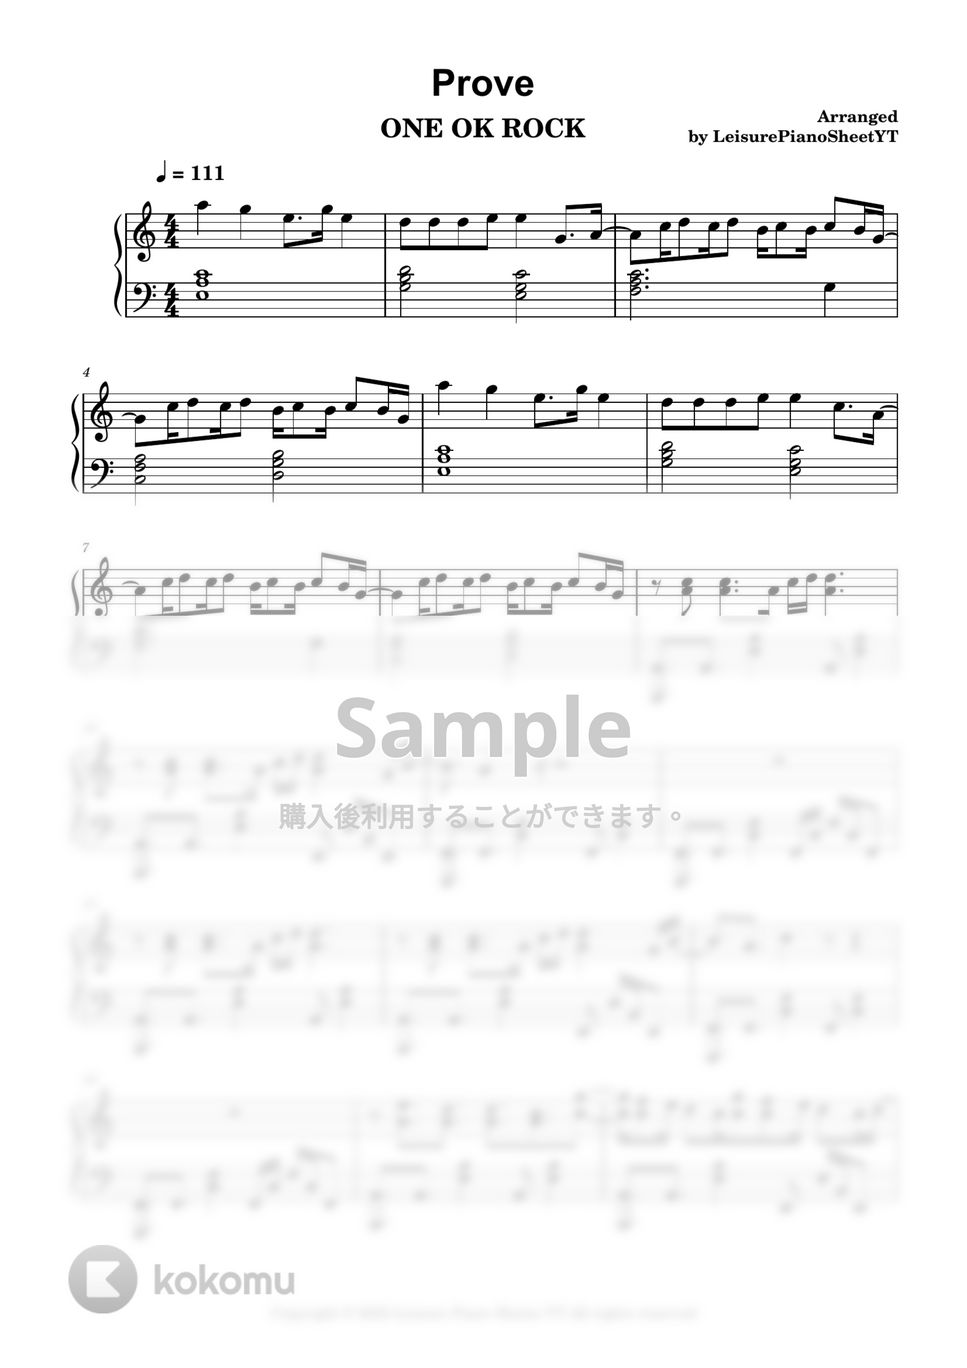 ONE OK ROCK - Prove by Leisure Piano Sheets